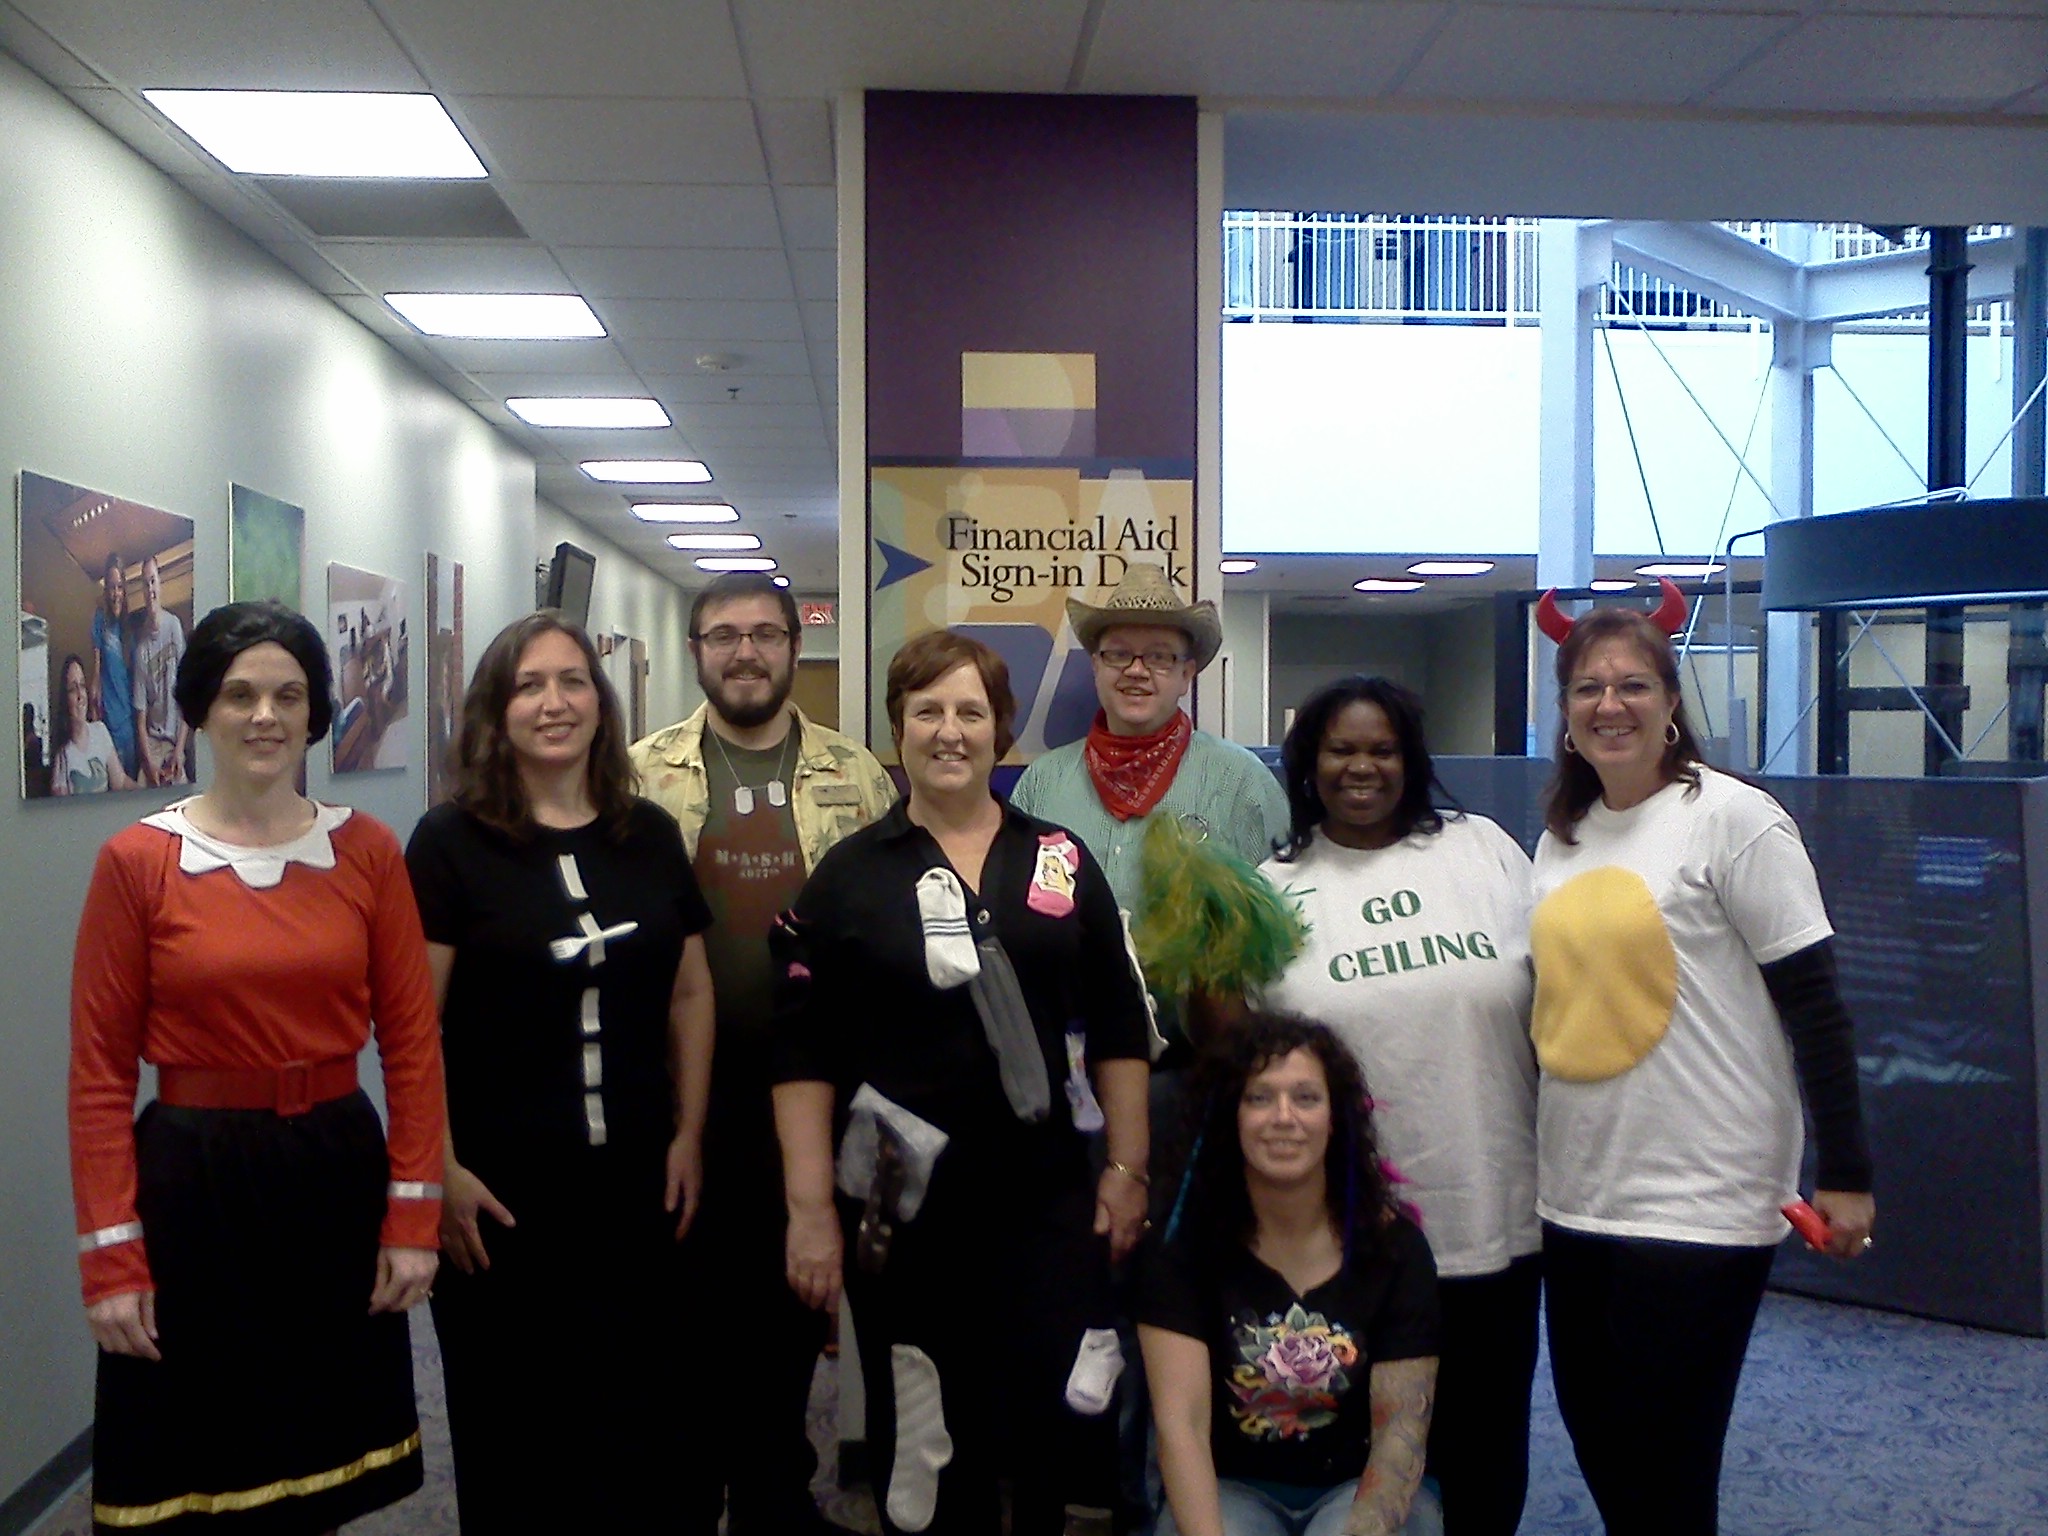 Photo of employees from the Wright State Office of Financial Aid dressed up for Halloween at the office.